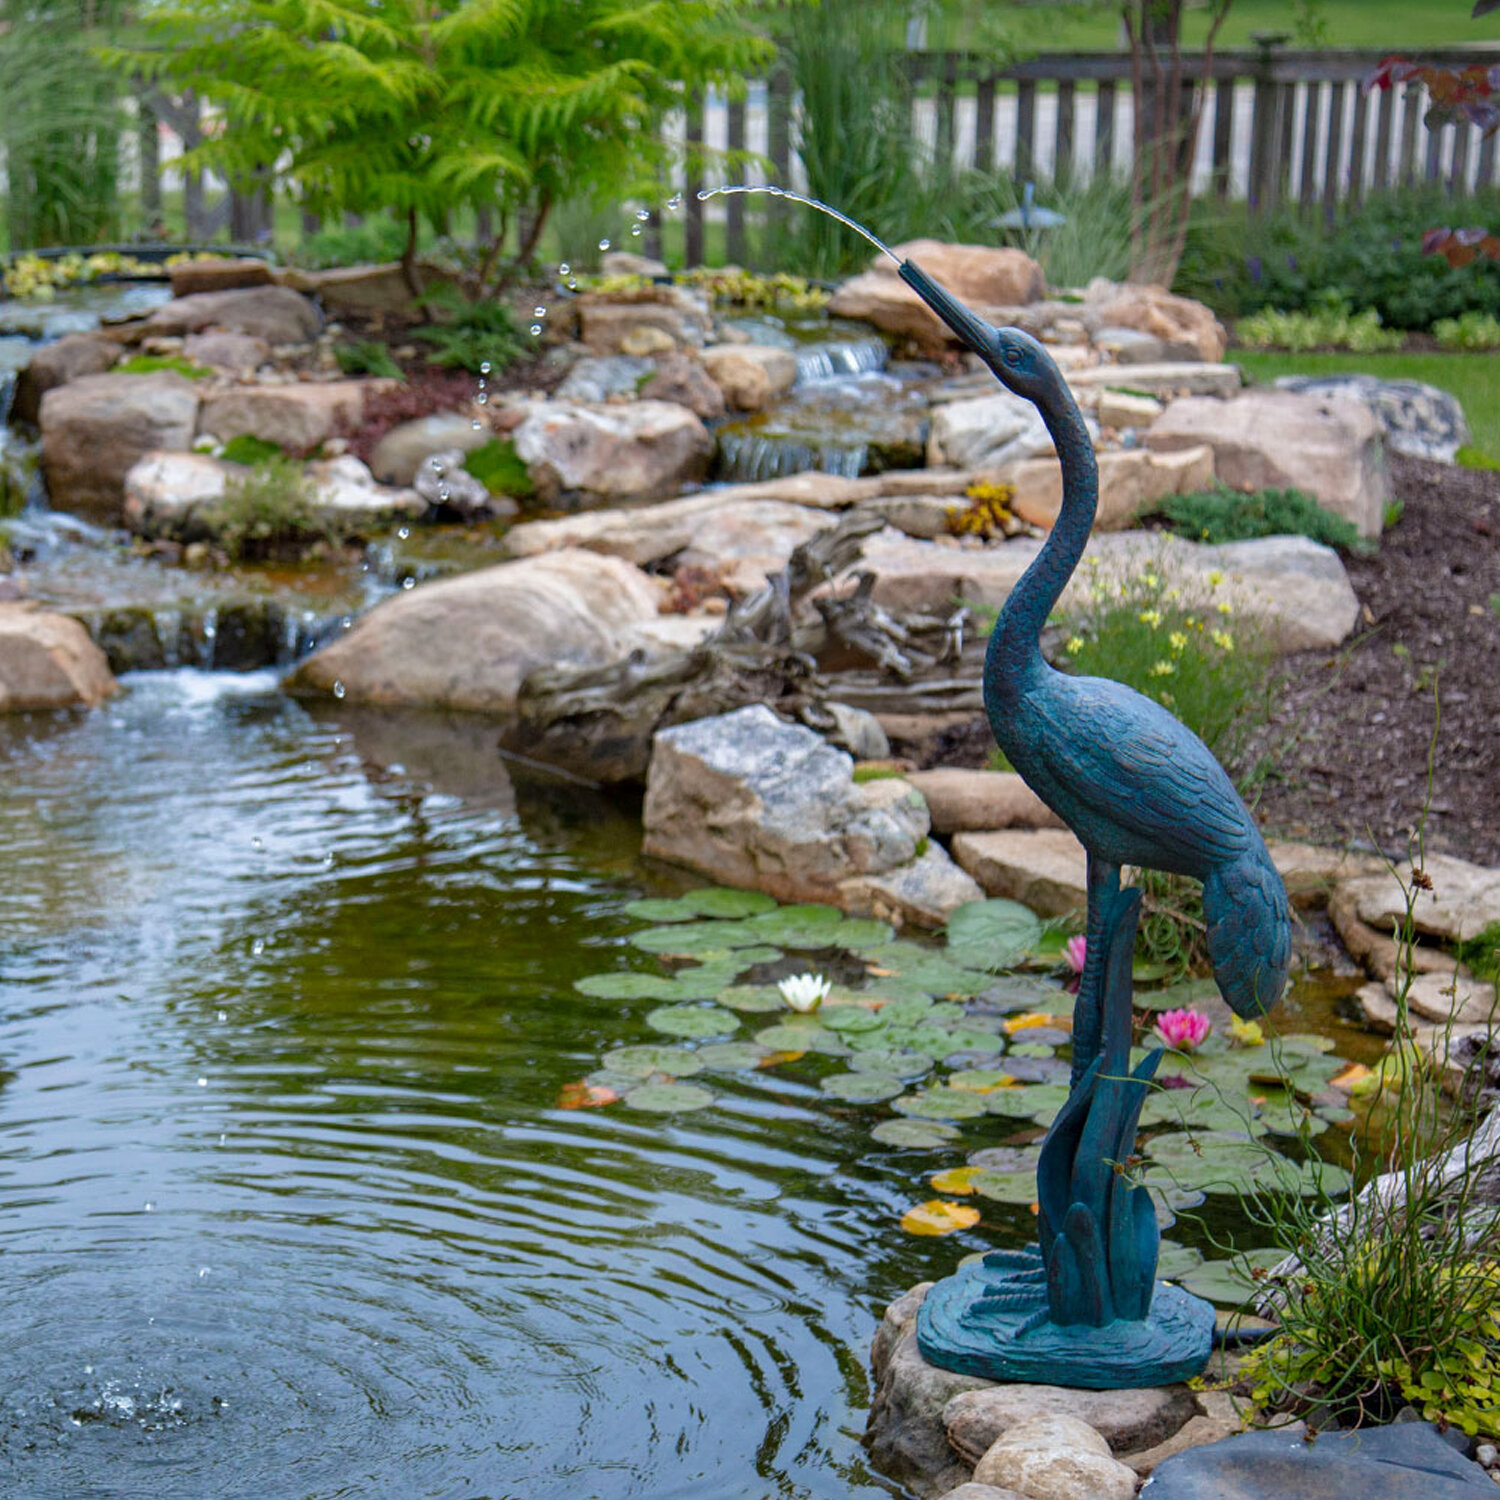 Aquascape Toucan Fountain Spitter for Pond Bird Garden 78011 Landscape and Water Features